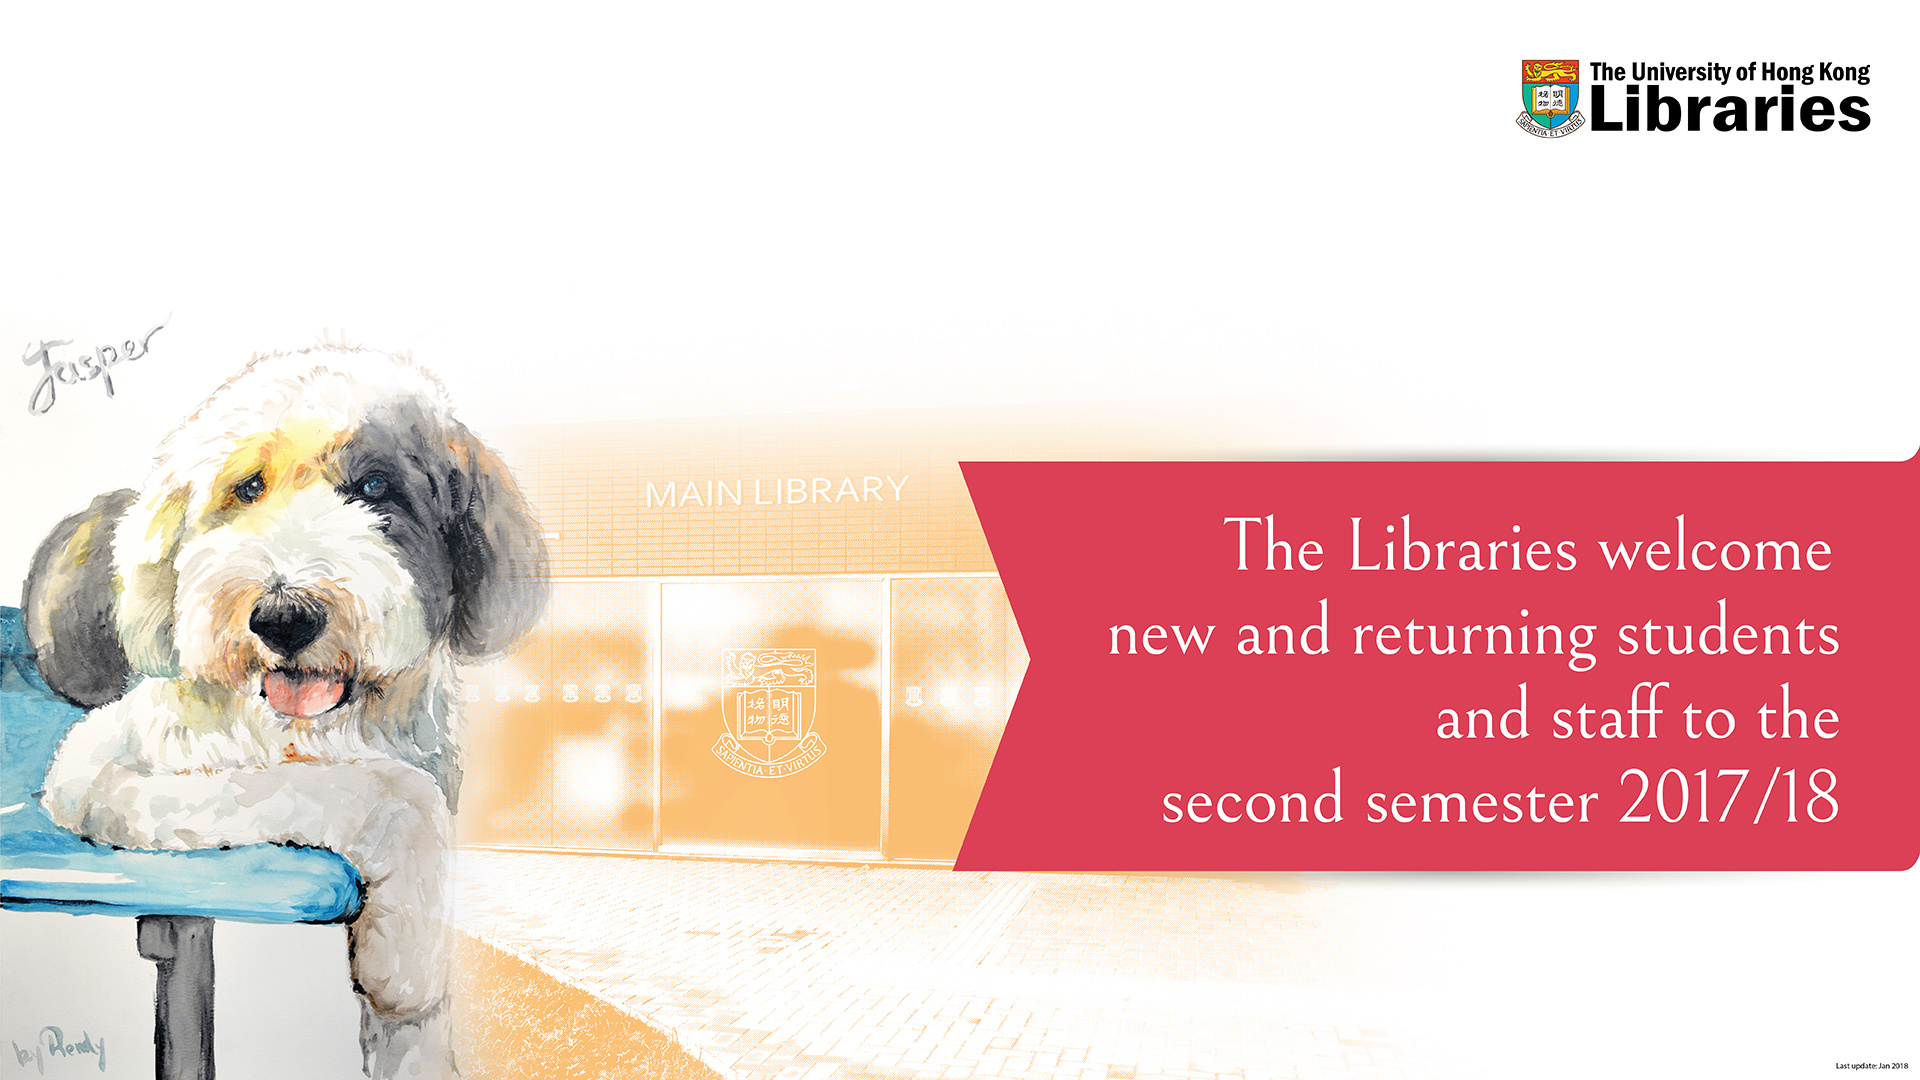 Welcome back message from the Libraries